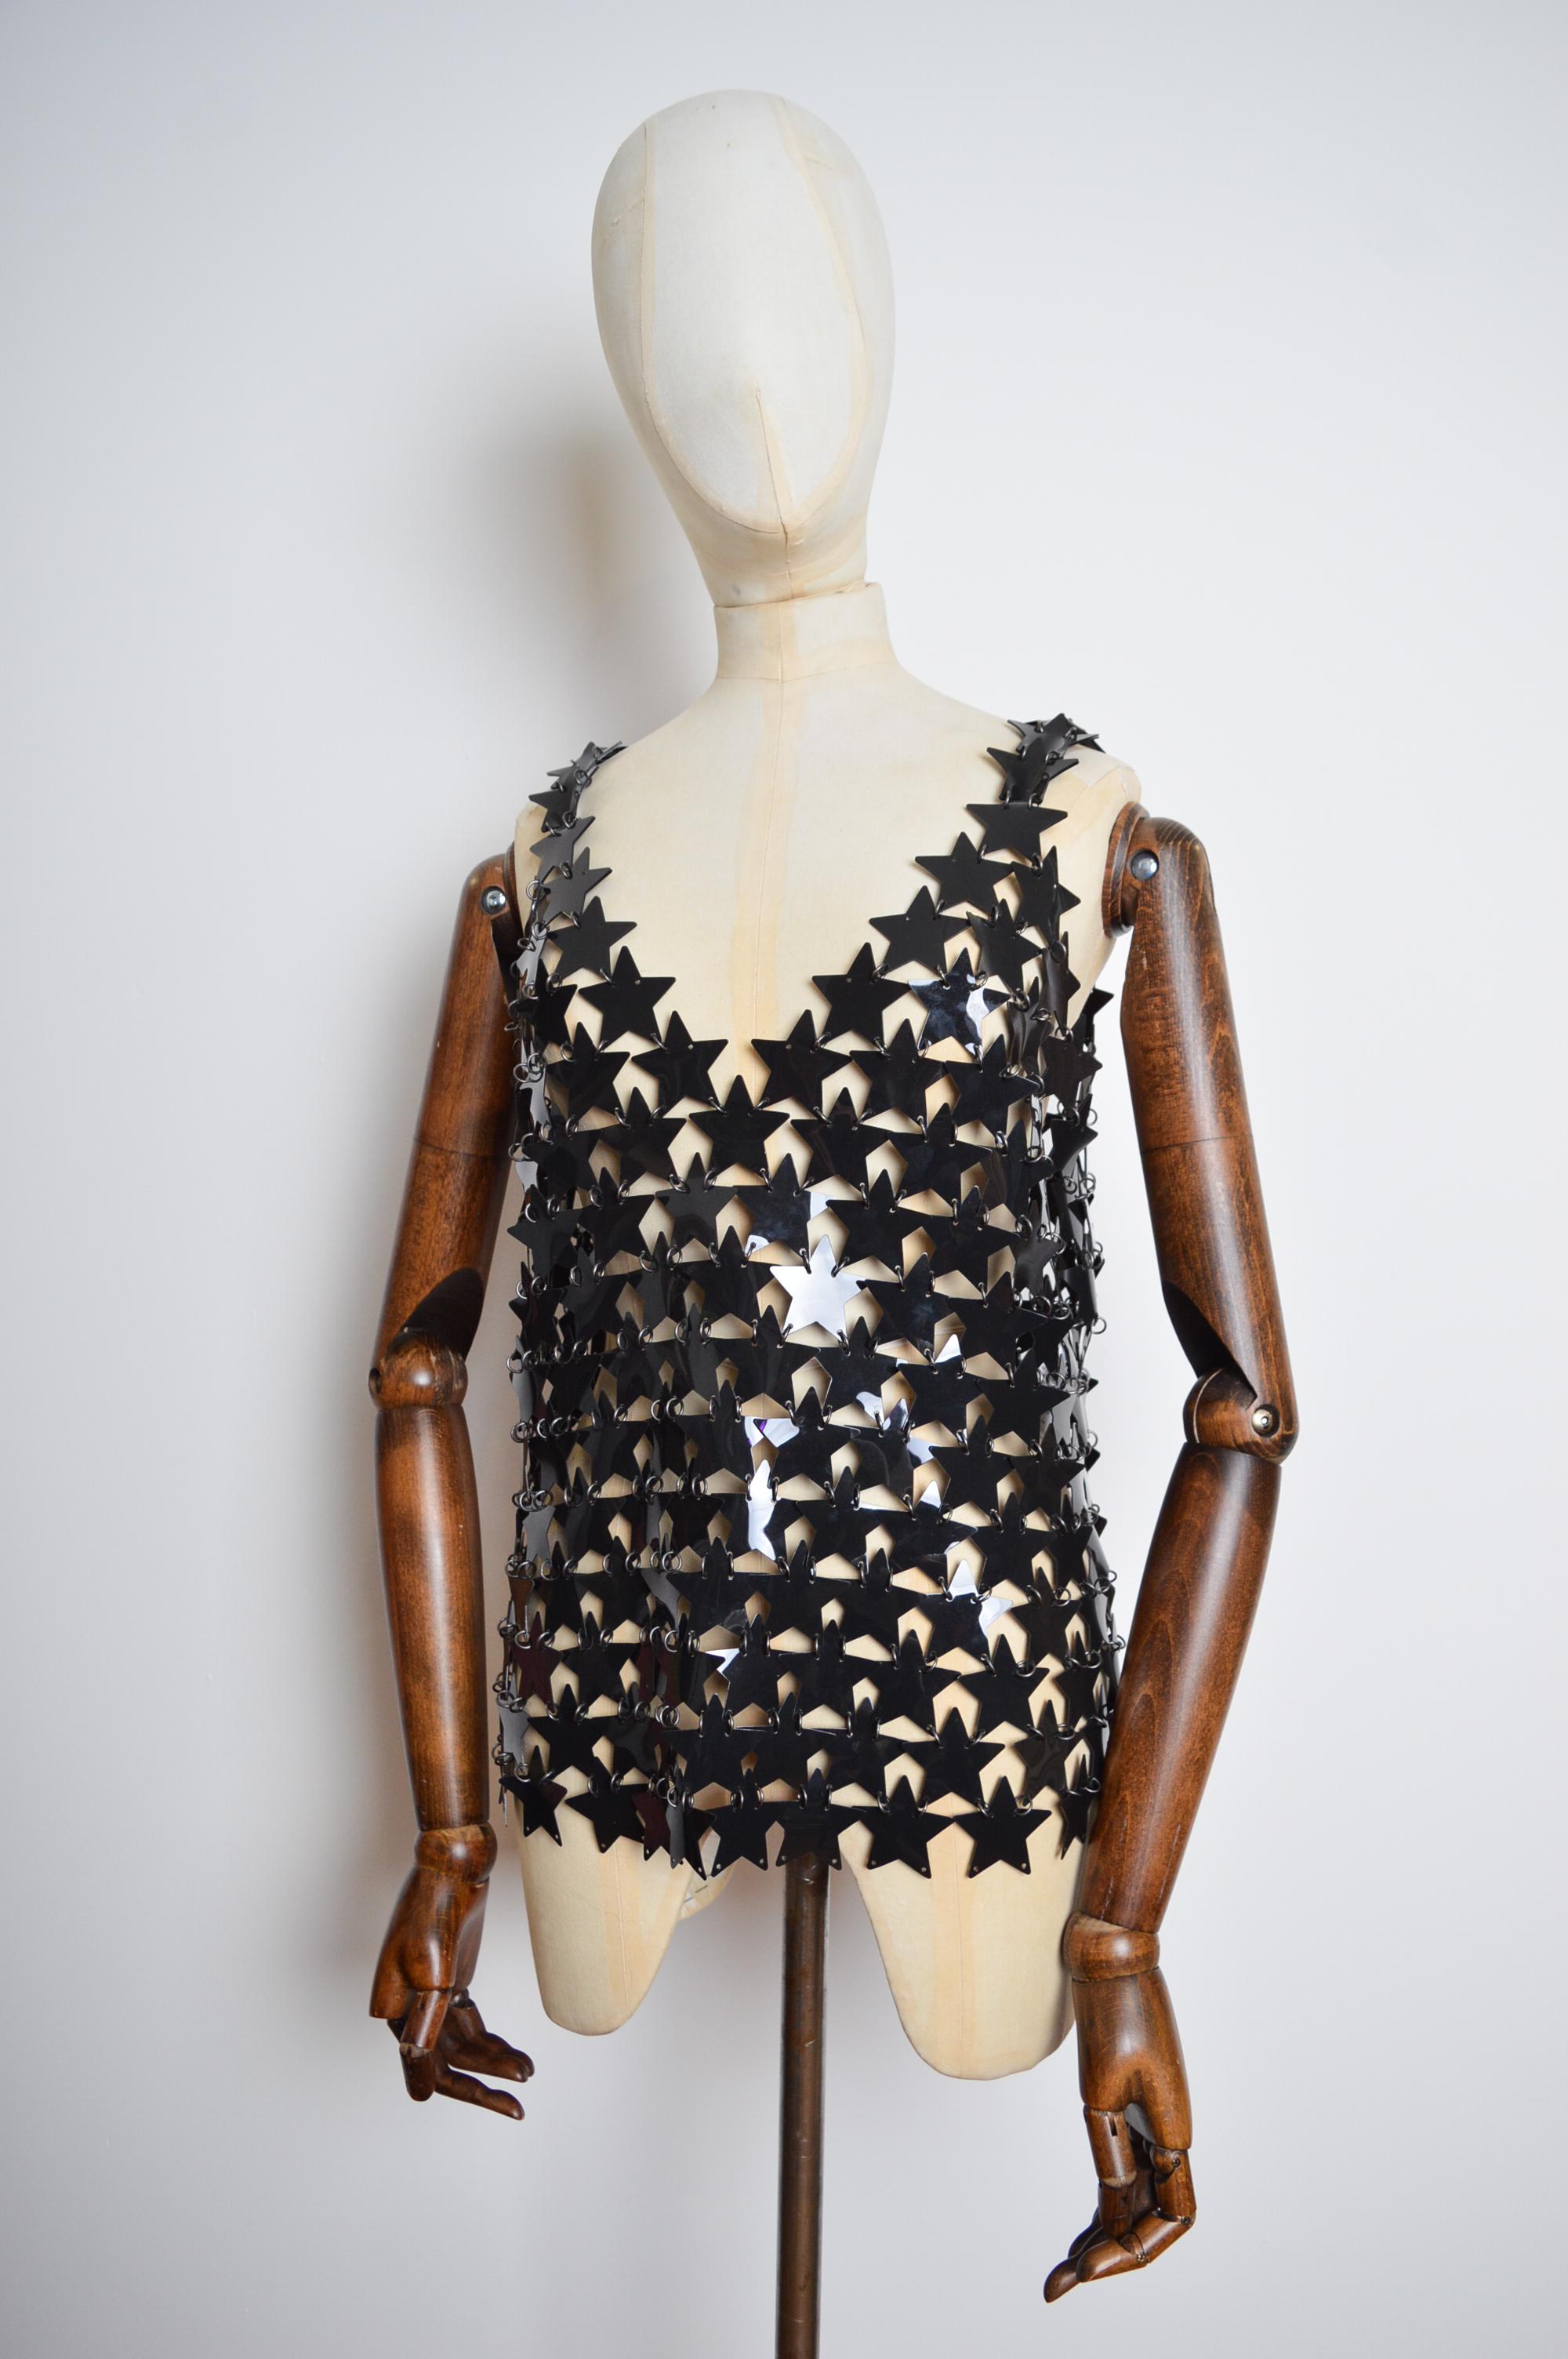 An instantly recognisable, Iconic Paco Rabanne Chain Mail Vest.   

Crafted in Madagascar from Black Star shaped Plastic discs with Silver coloured brass attachments.

The Vest can be worn on a variety of sizes due to the Loose nature of the